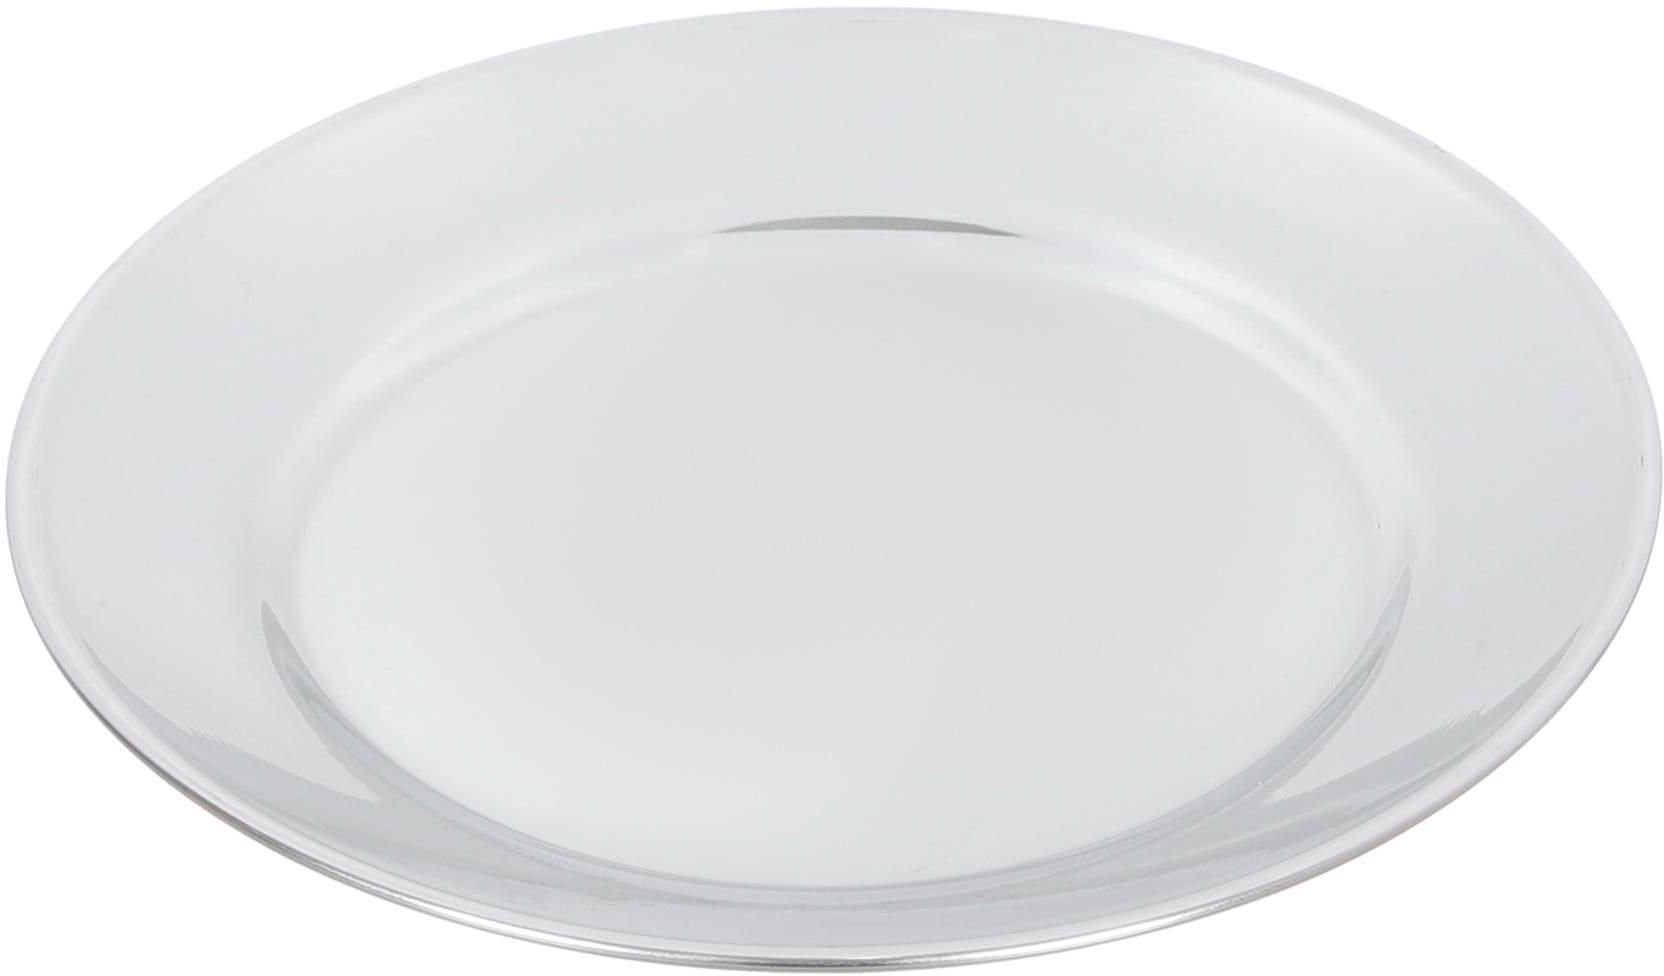 Get Aboud Round Flat Plate, 17 cm - Silver with best offers | Raneen.com